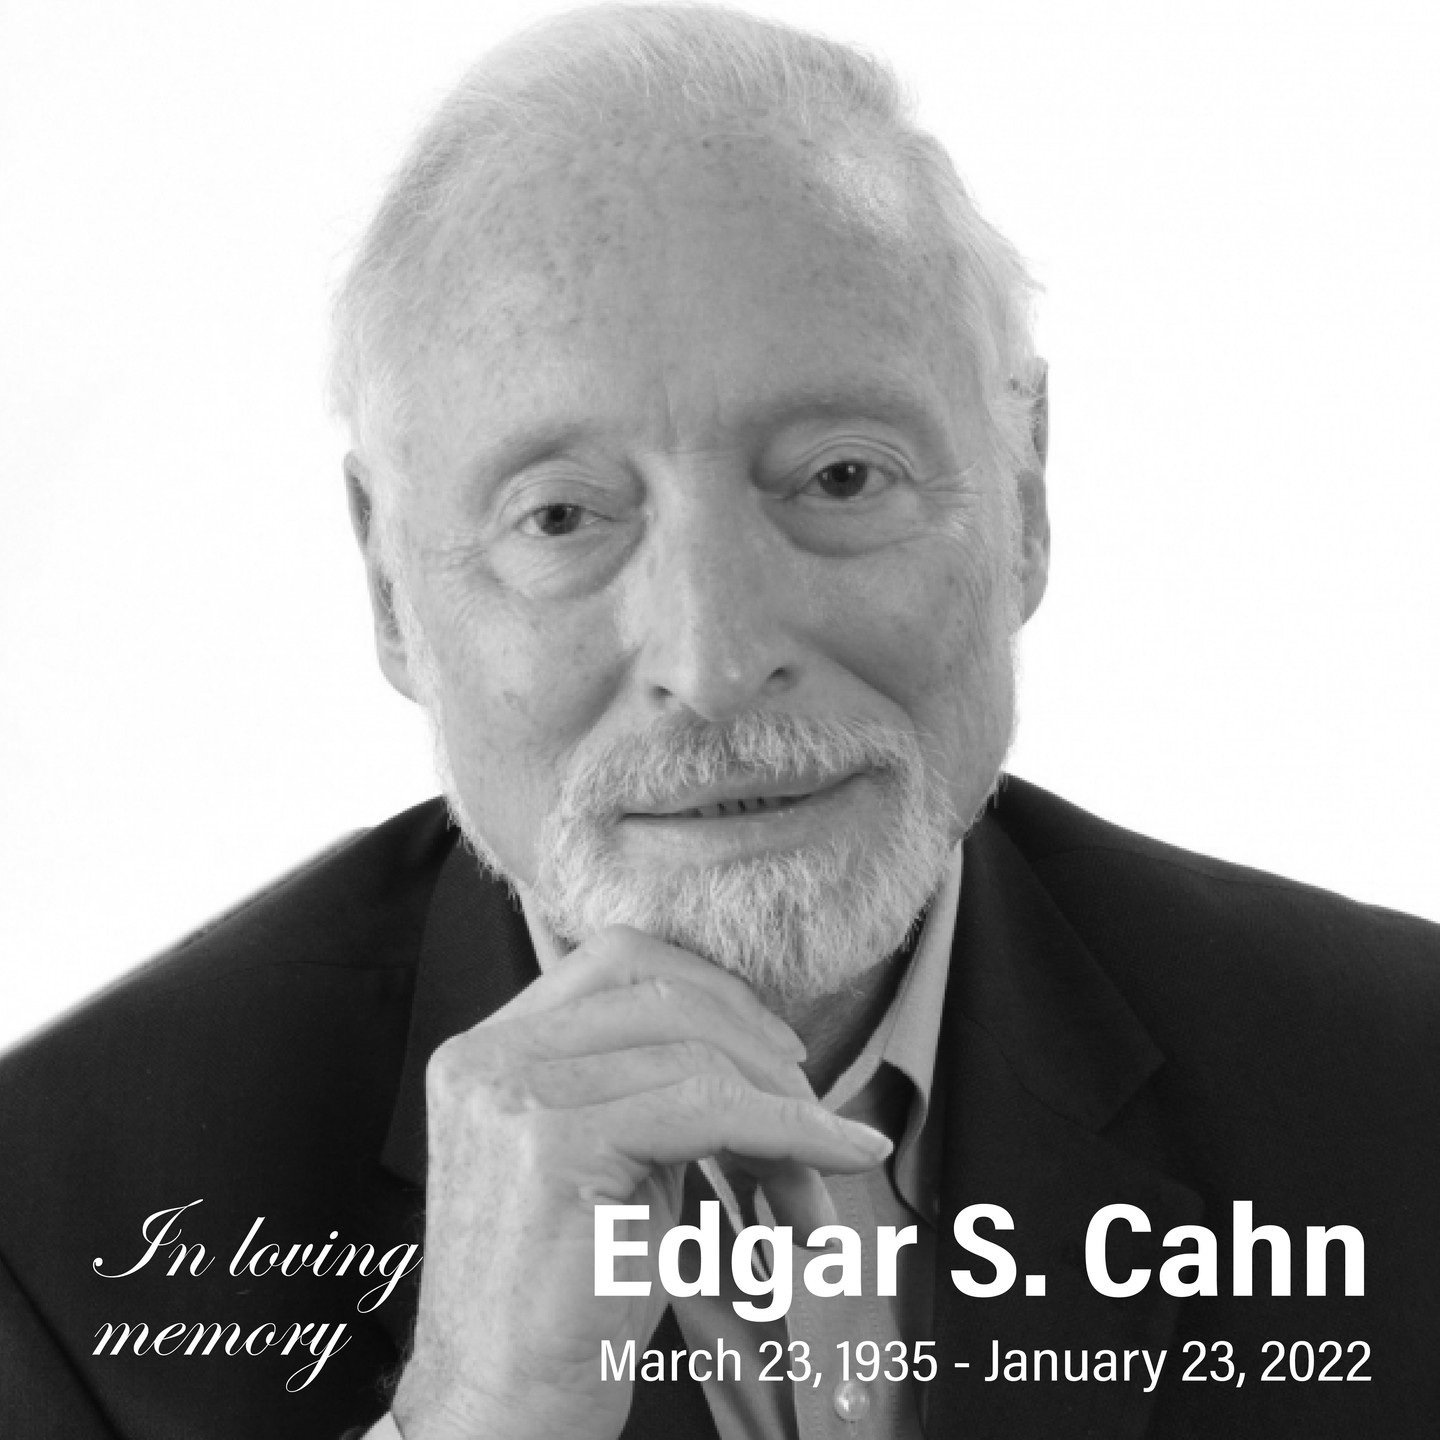 The UDC David A. Clarke School of Law mourns the passing of Edgar S. Cahn. Cahn was a co-founder with his late wife Jean Camper Cahn of the Antioch School of Law, UDC David A. Clarke School of Law’s predecessor. Antioch was the first law school in the United States to educate law students primarily through clinical training in legal services to the poor, a vital part of UDC Law’s mission to this day.